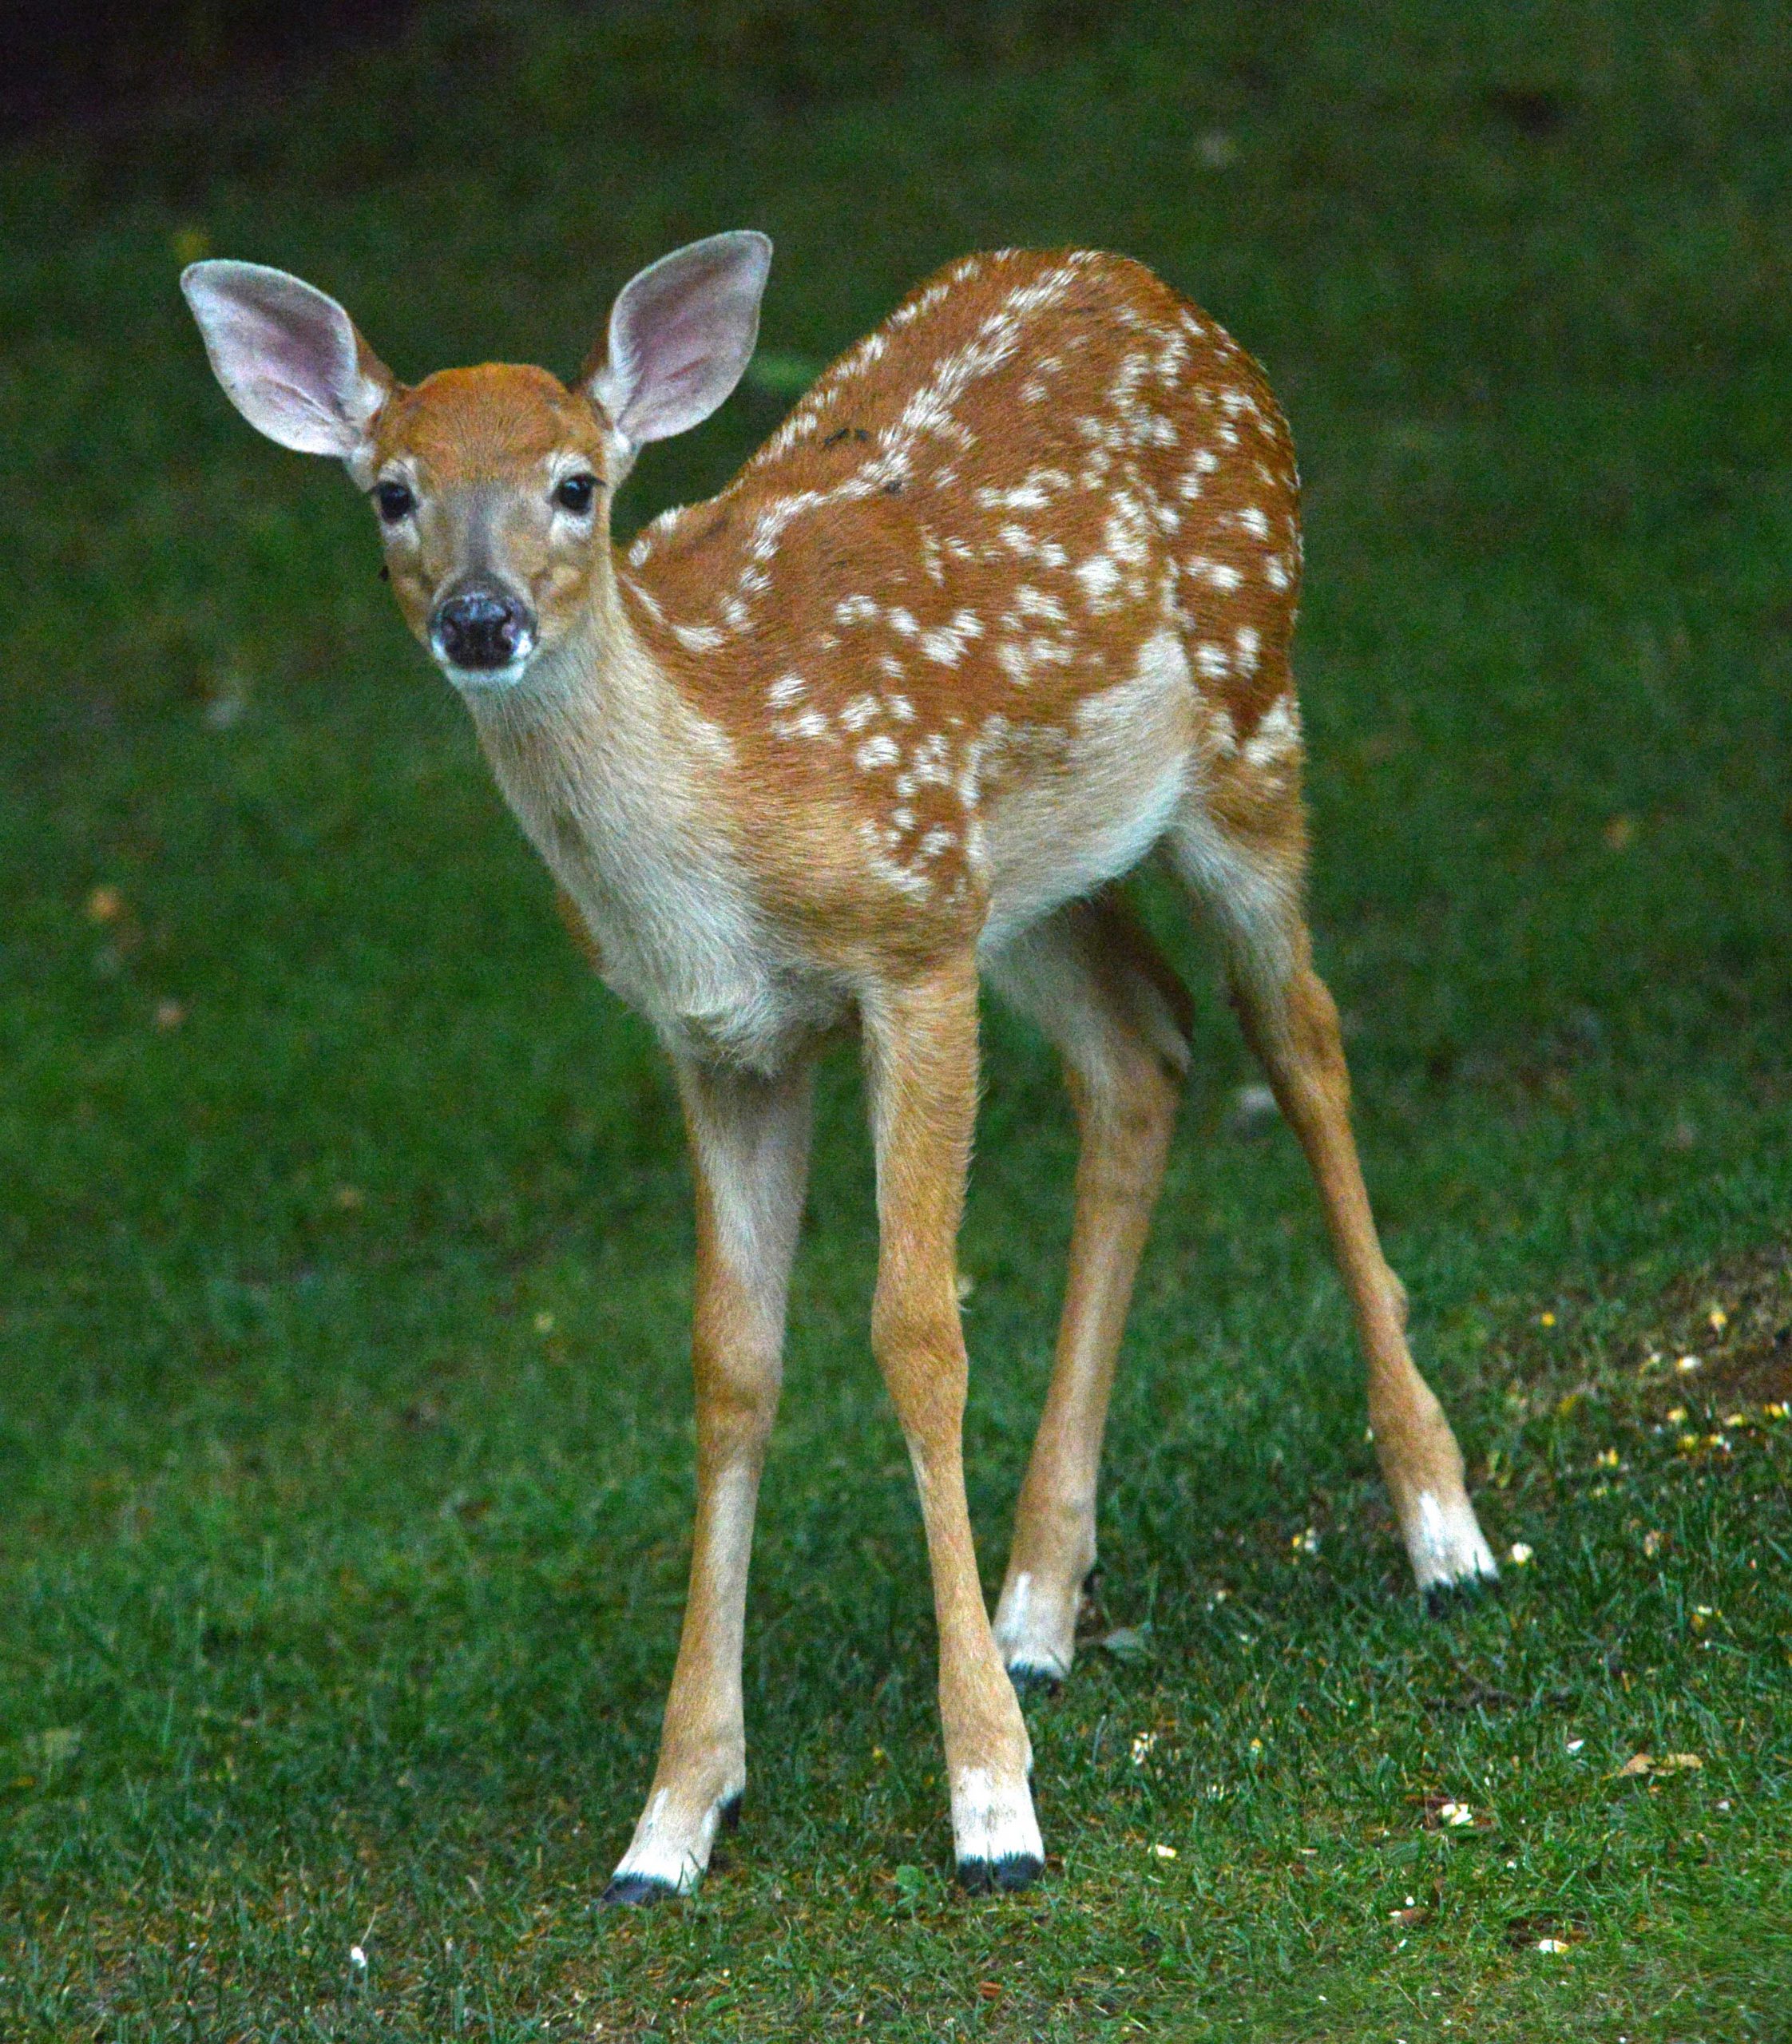 What do you call a male deer with white spots?